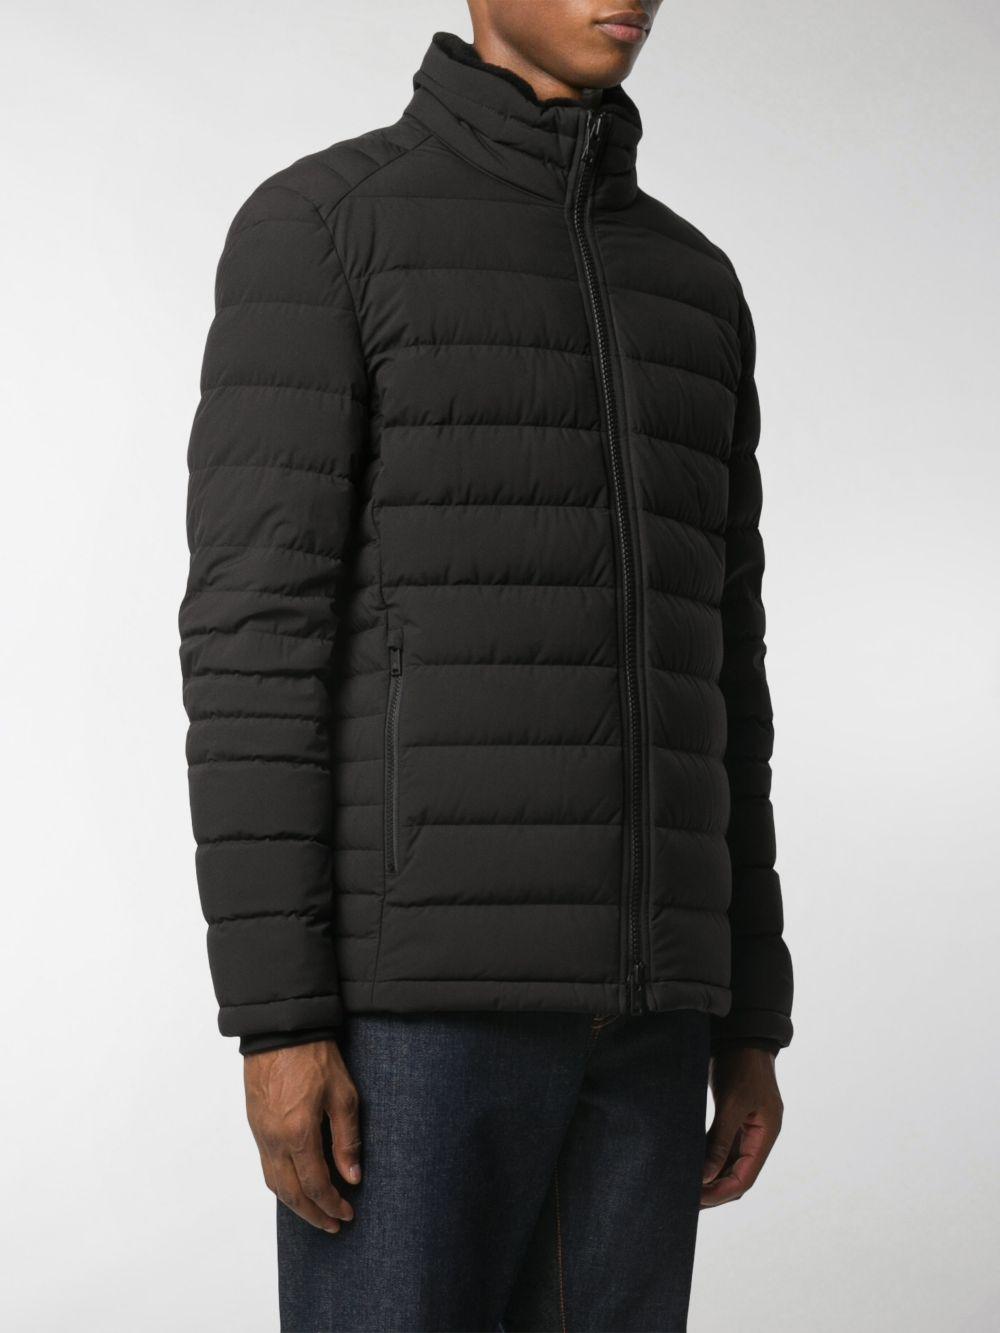 Moose Knuckles Quilted Puffer Jacket in Black for Men - Lyst